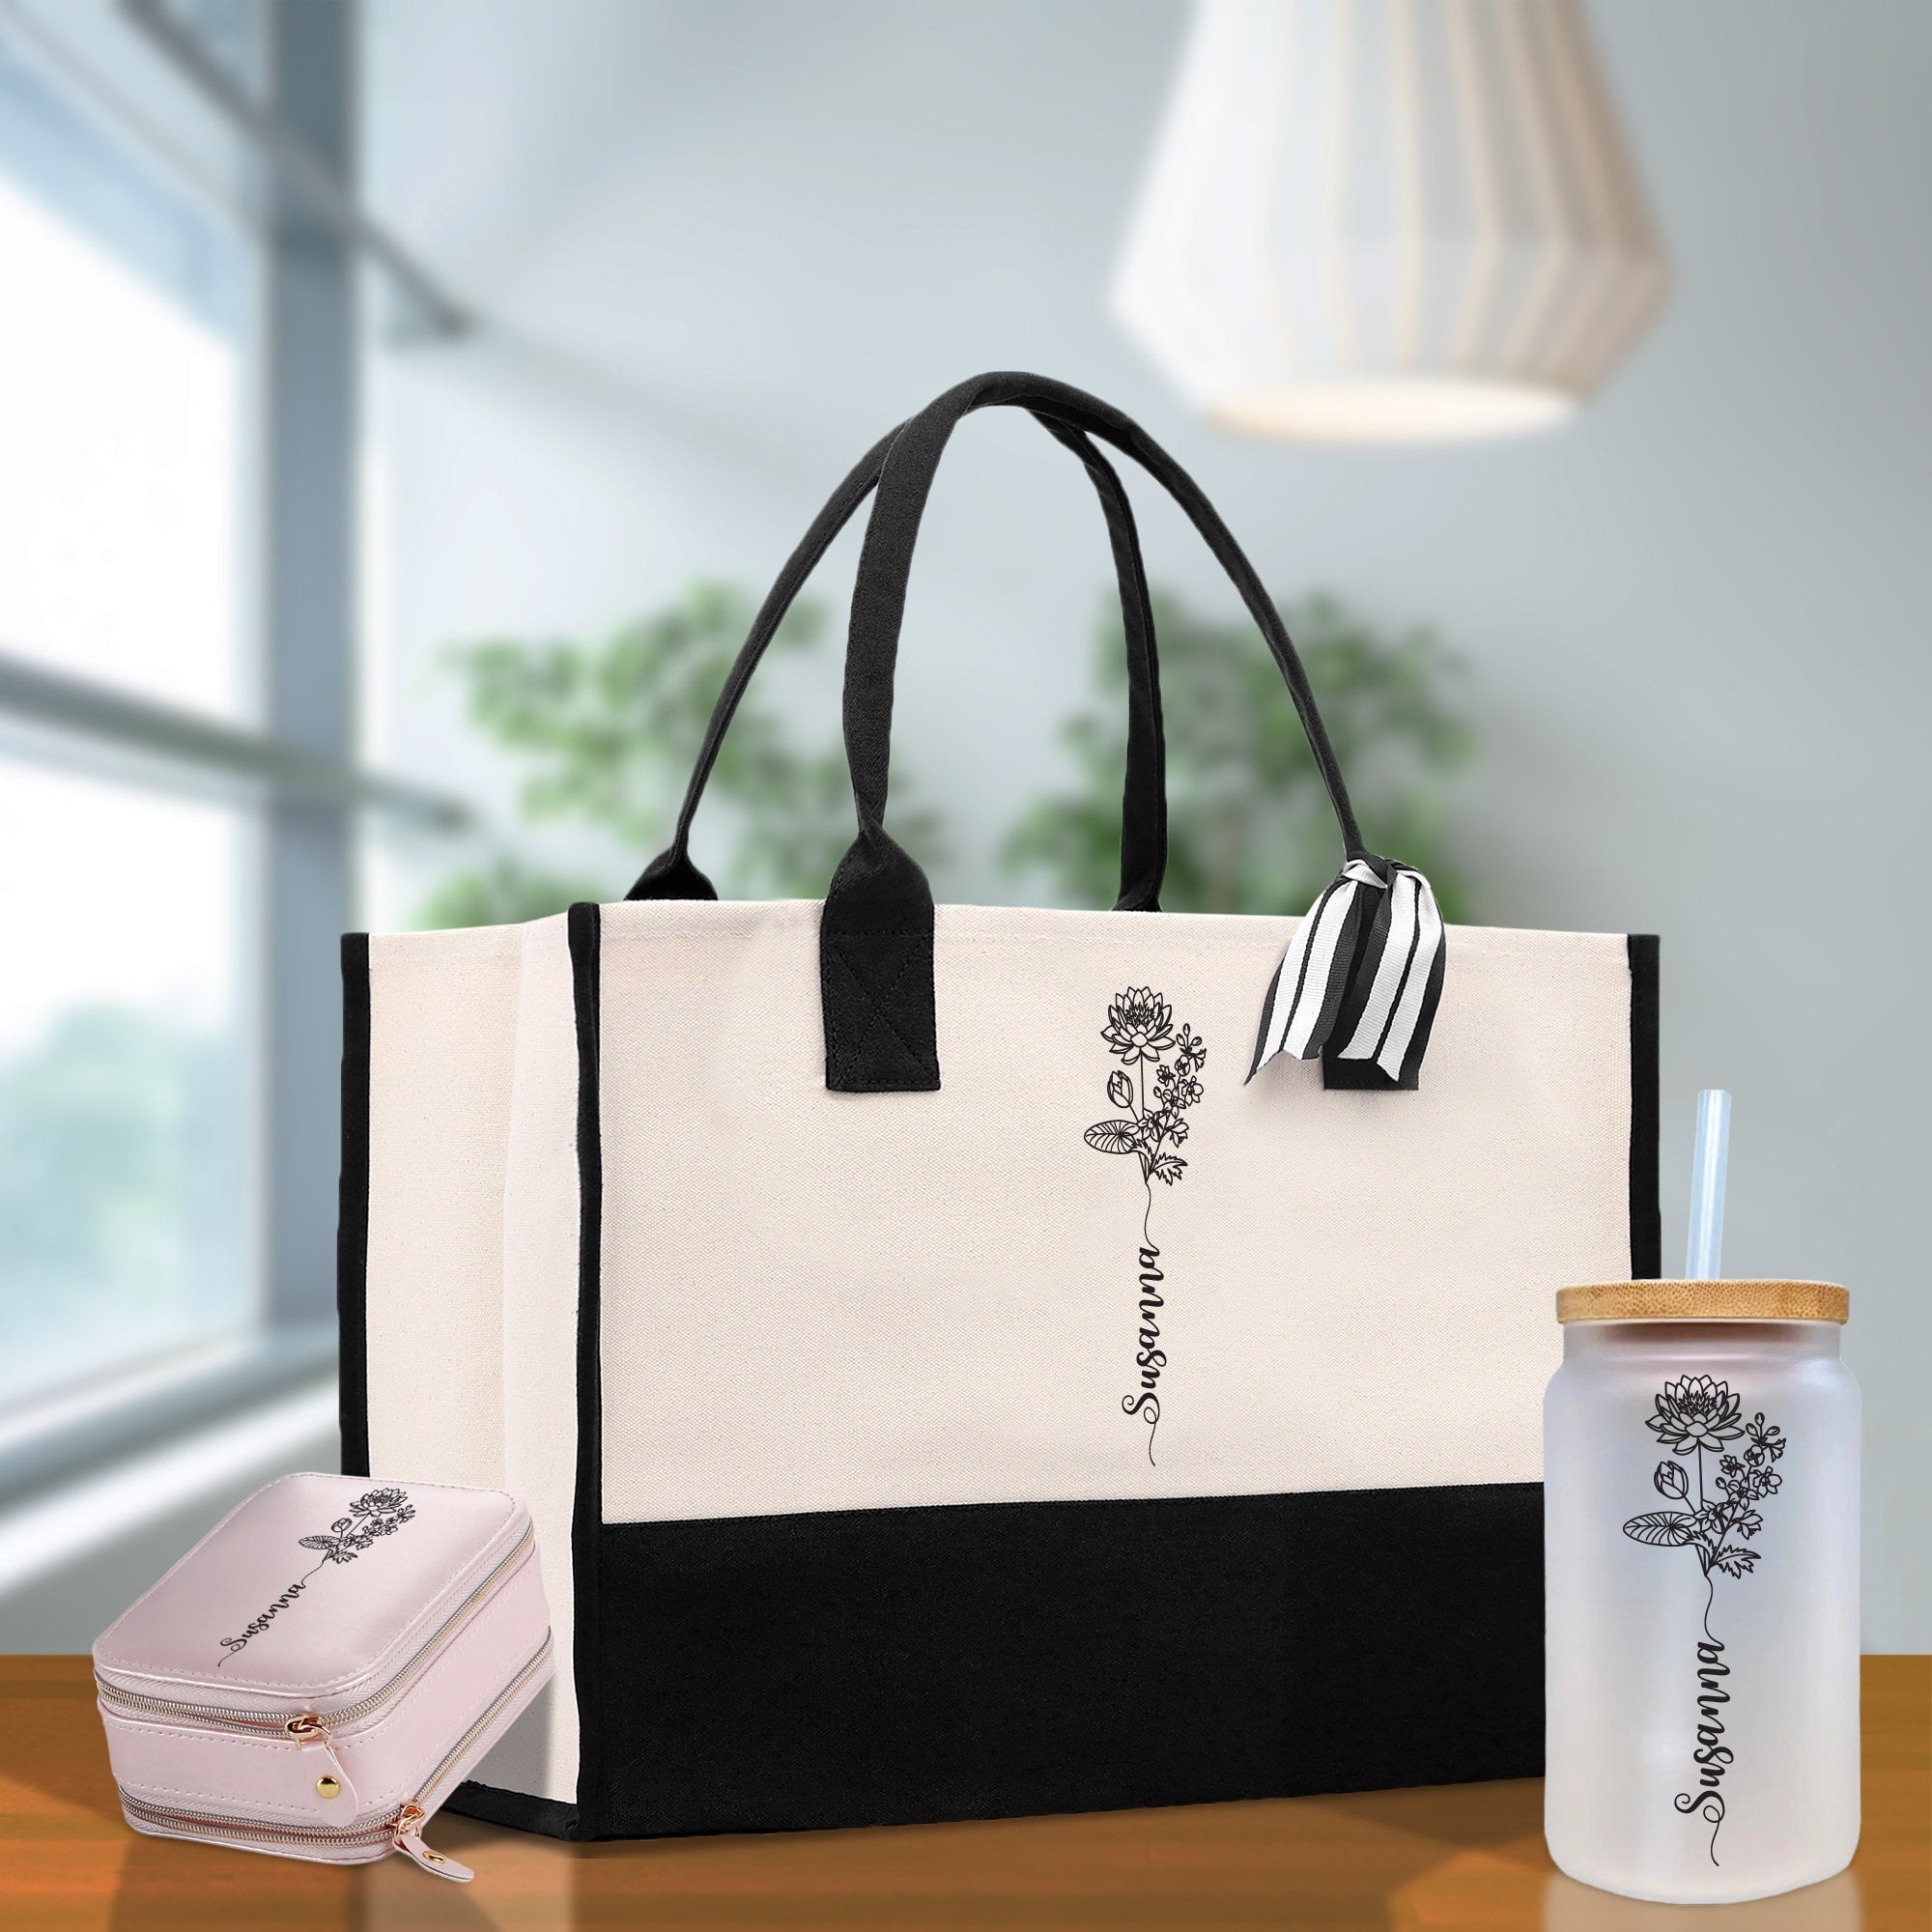 a black and white tote bag next to a bottle of water